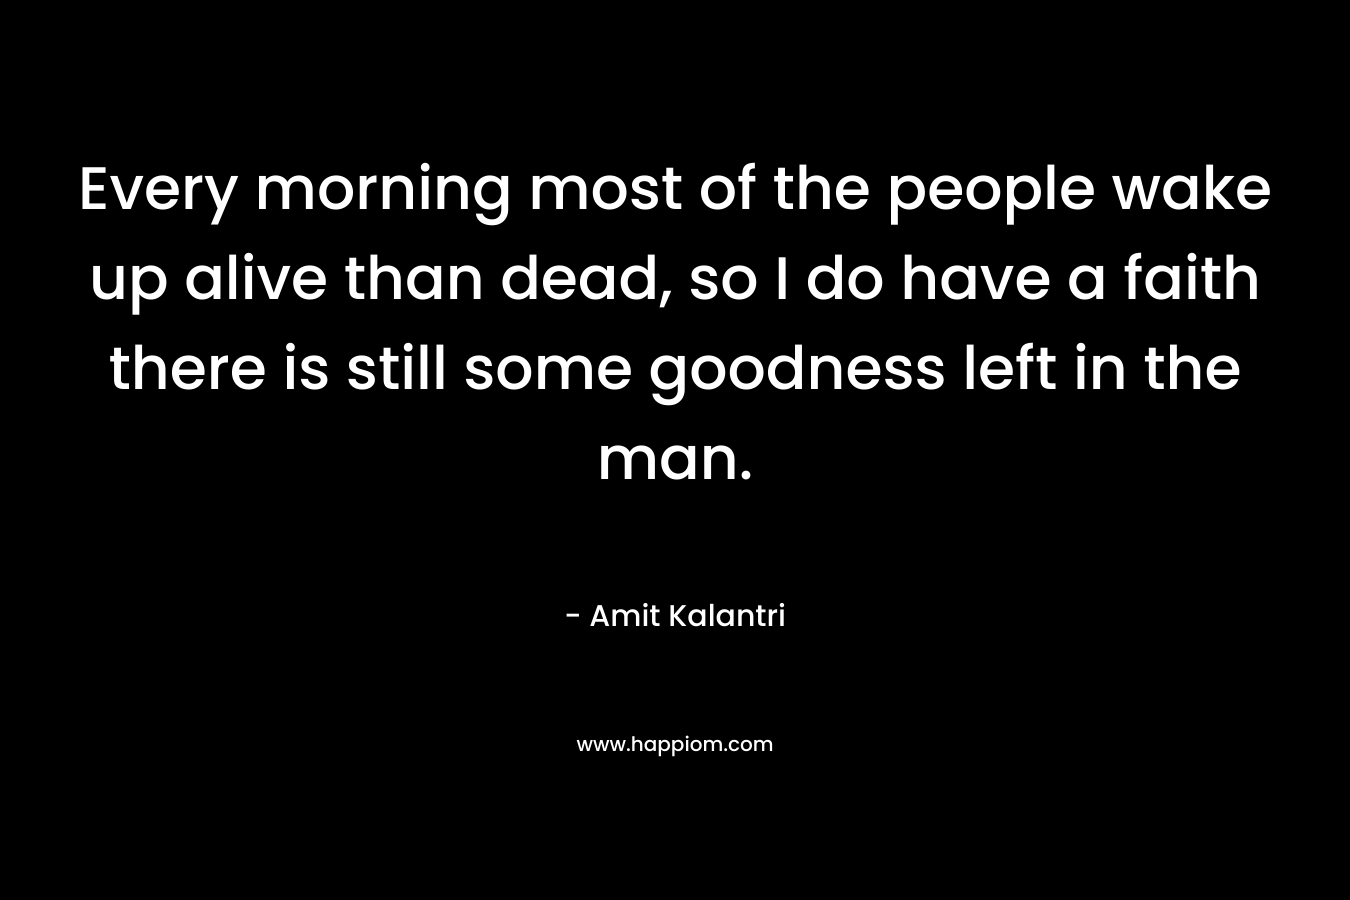 Every morning most of the people wake up alive than dead, so I do have a faith there is still some goodness left in the man. – Amit Kalantri